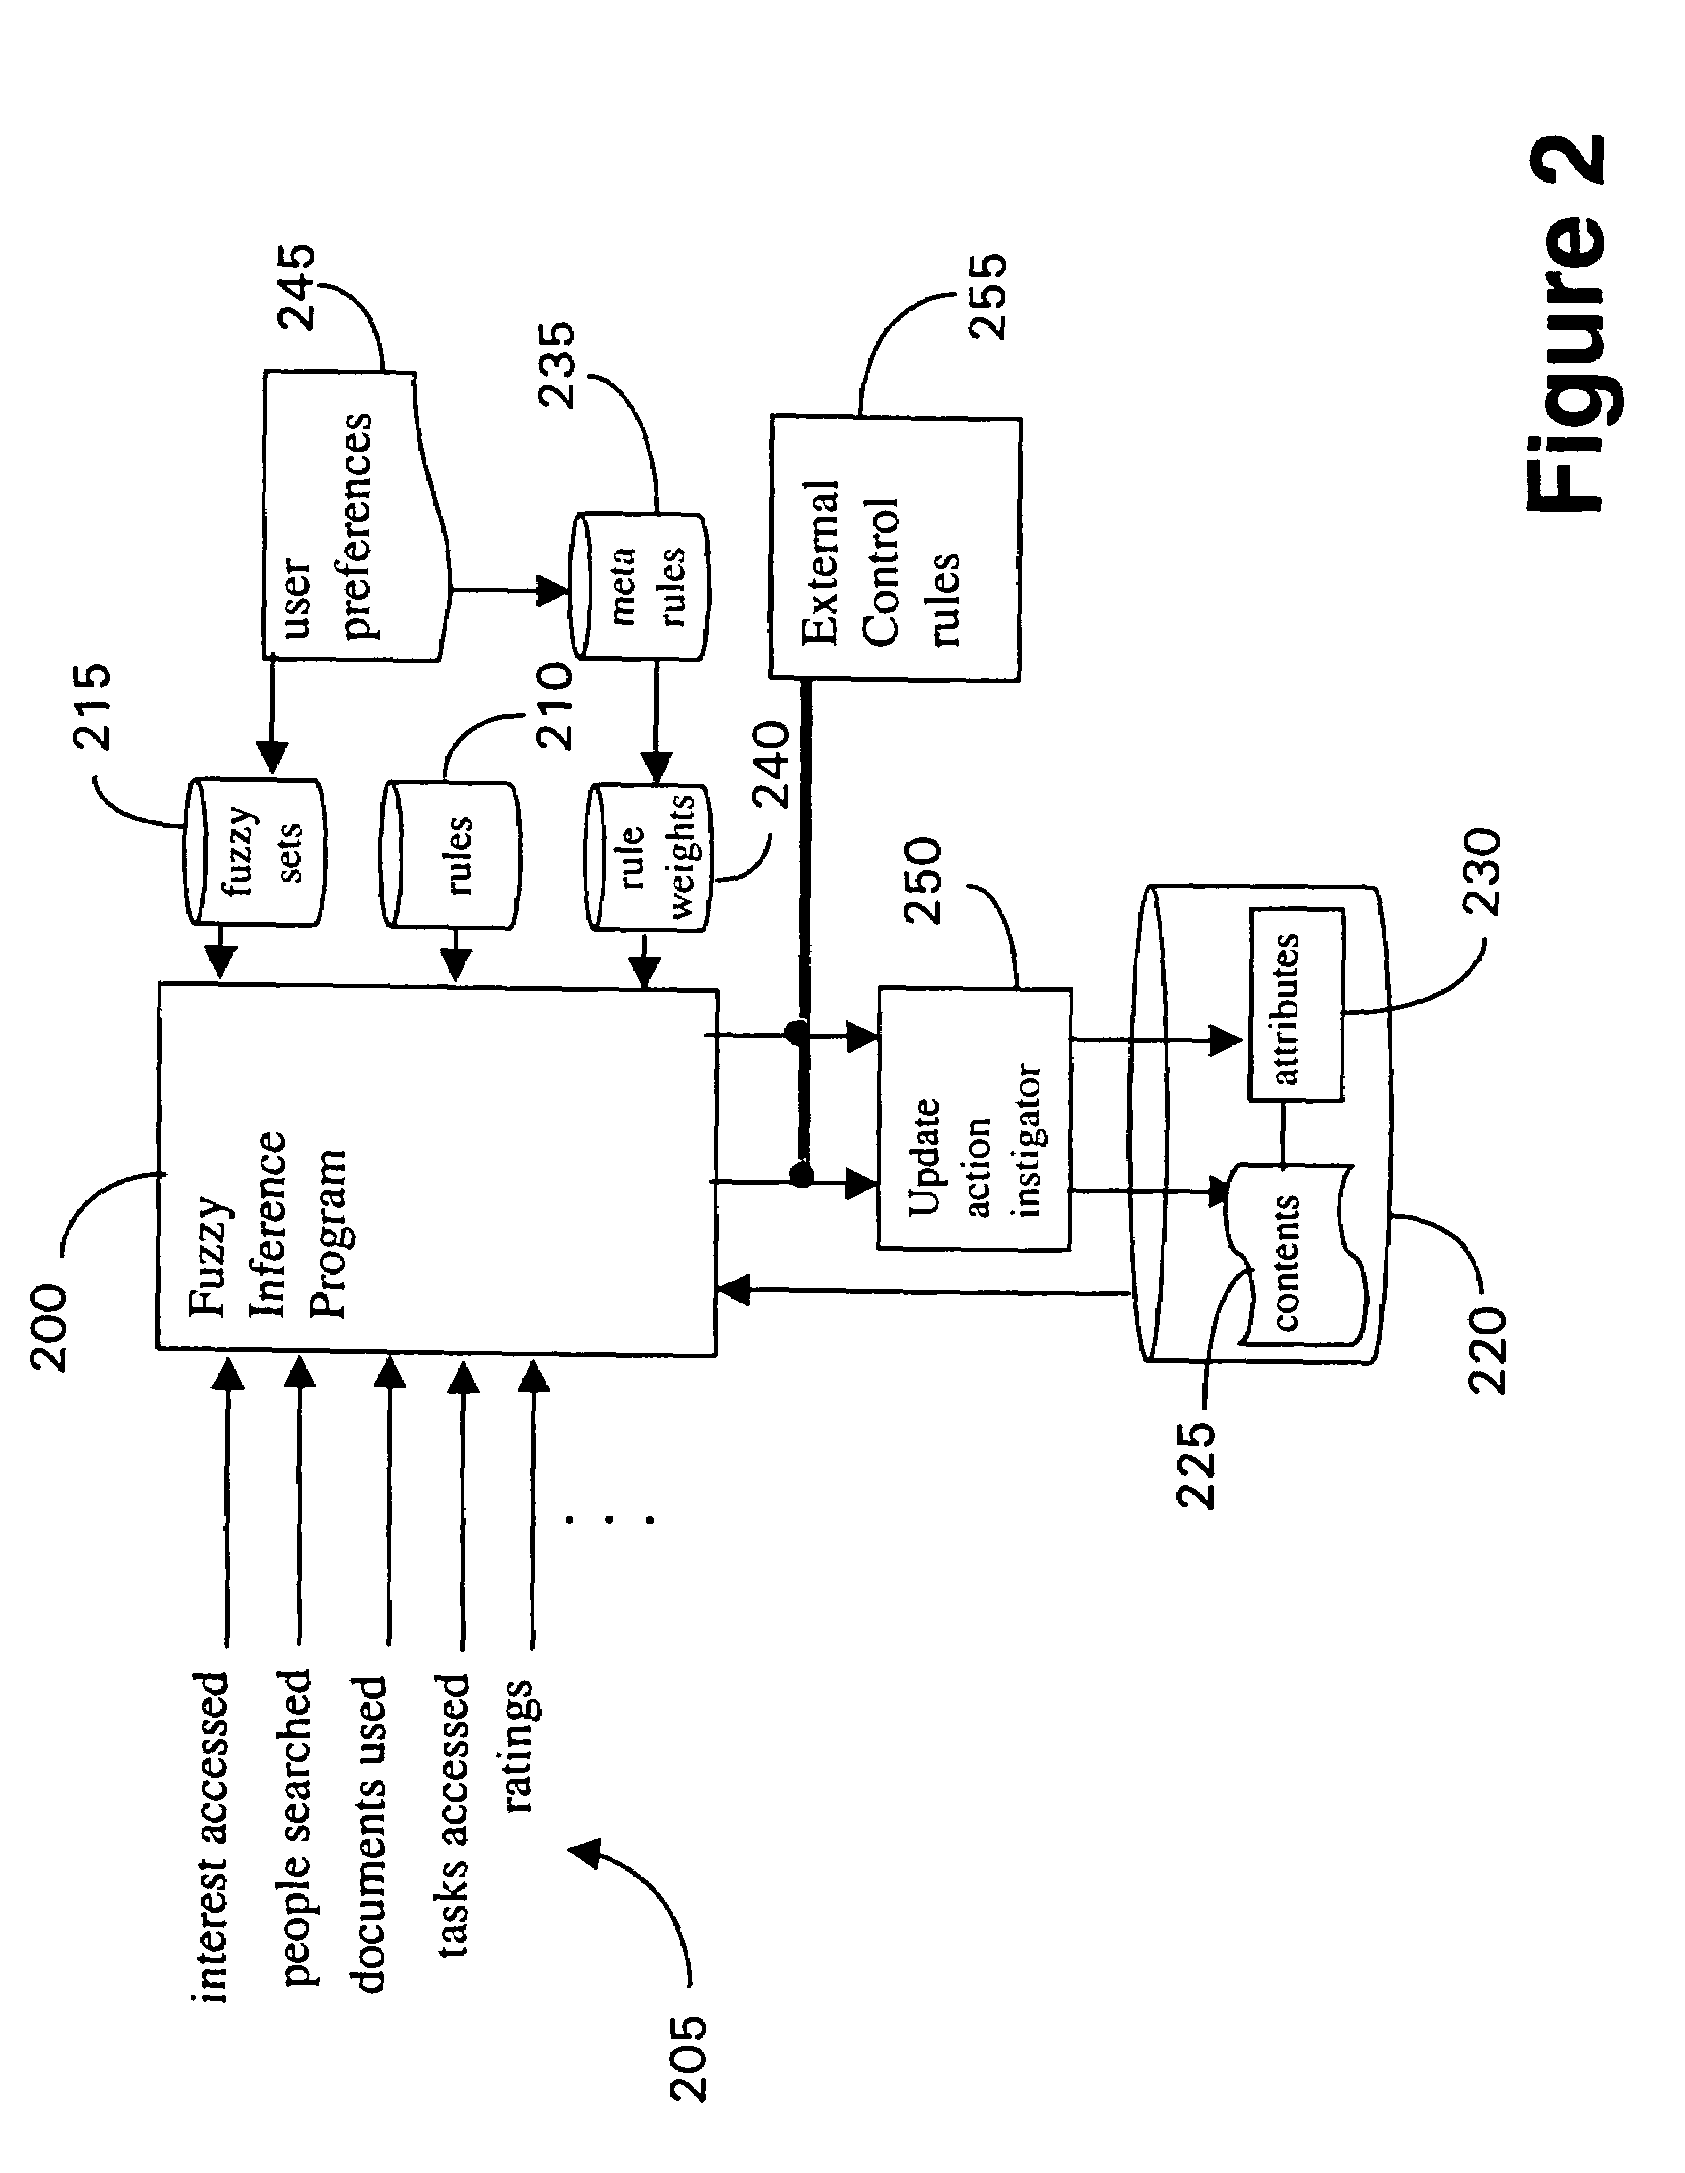 Method and apparatus for automatic updating of user profiles